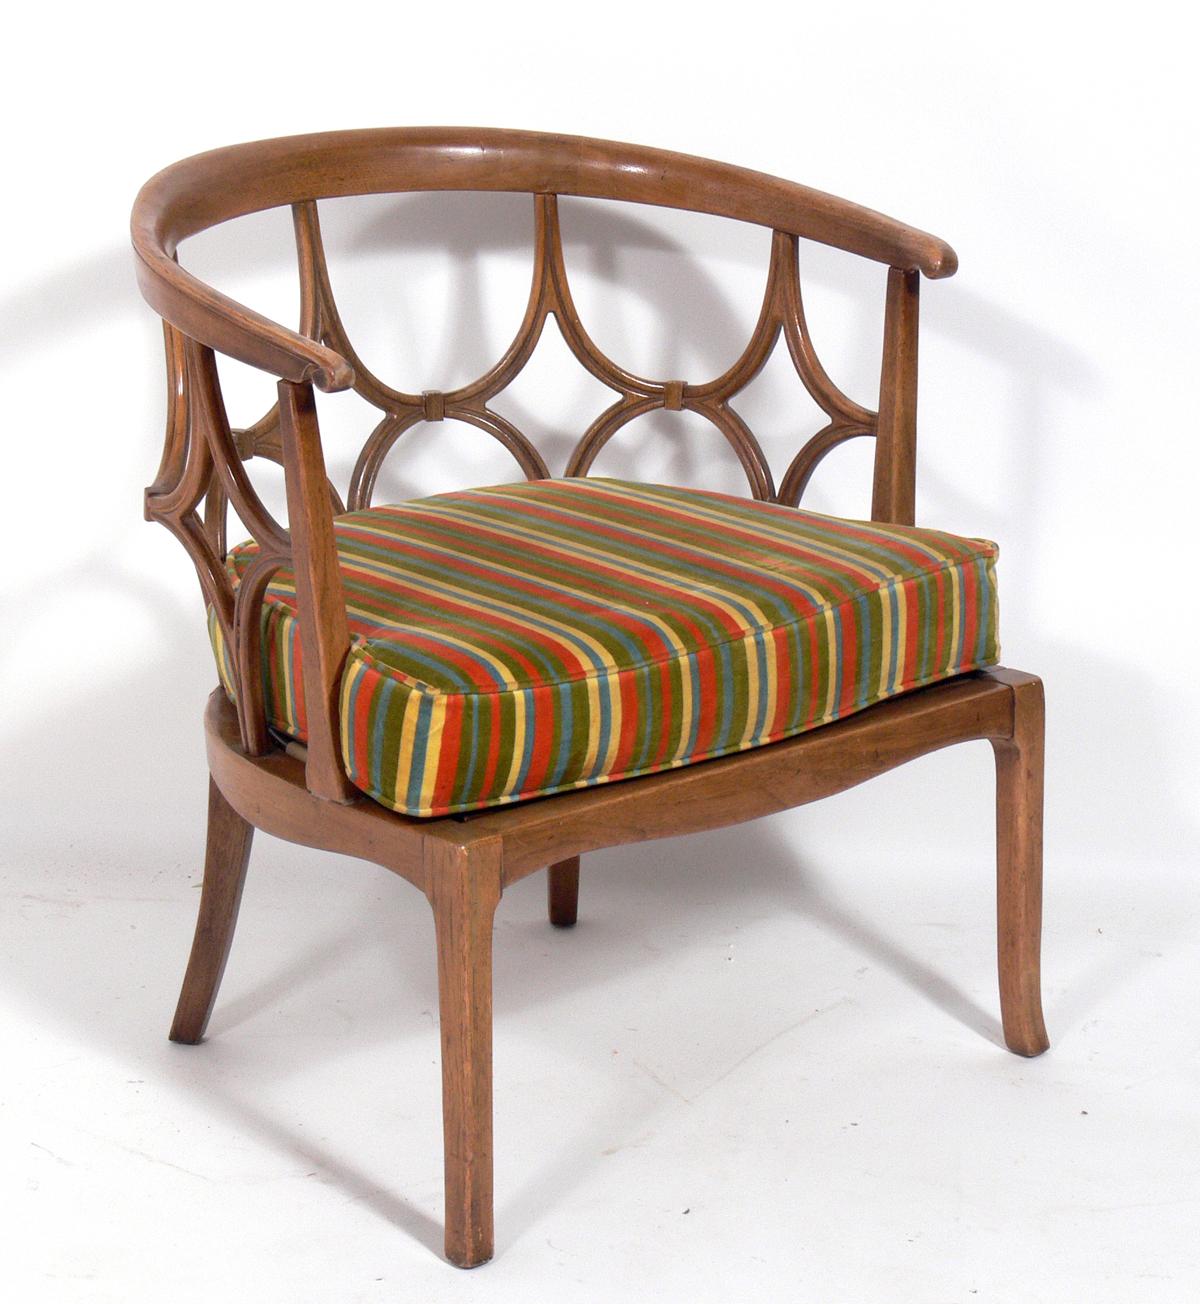 Pair of Sculptural fret back chairs, design attributed to John Lubberts and Lambert Muller, and made by Tomlinson, American, circa 1960s. These chairs are currently being refinished and reupholstered and can be completed in your choice of finish